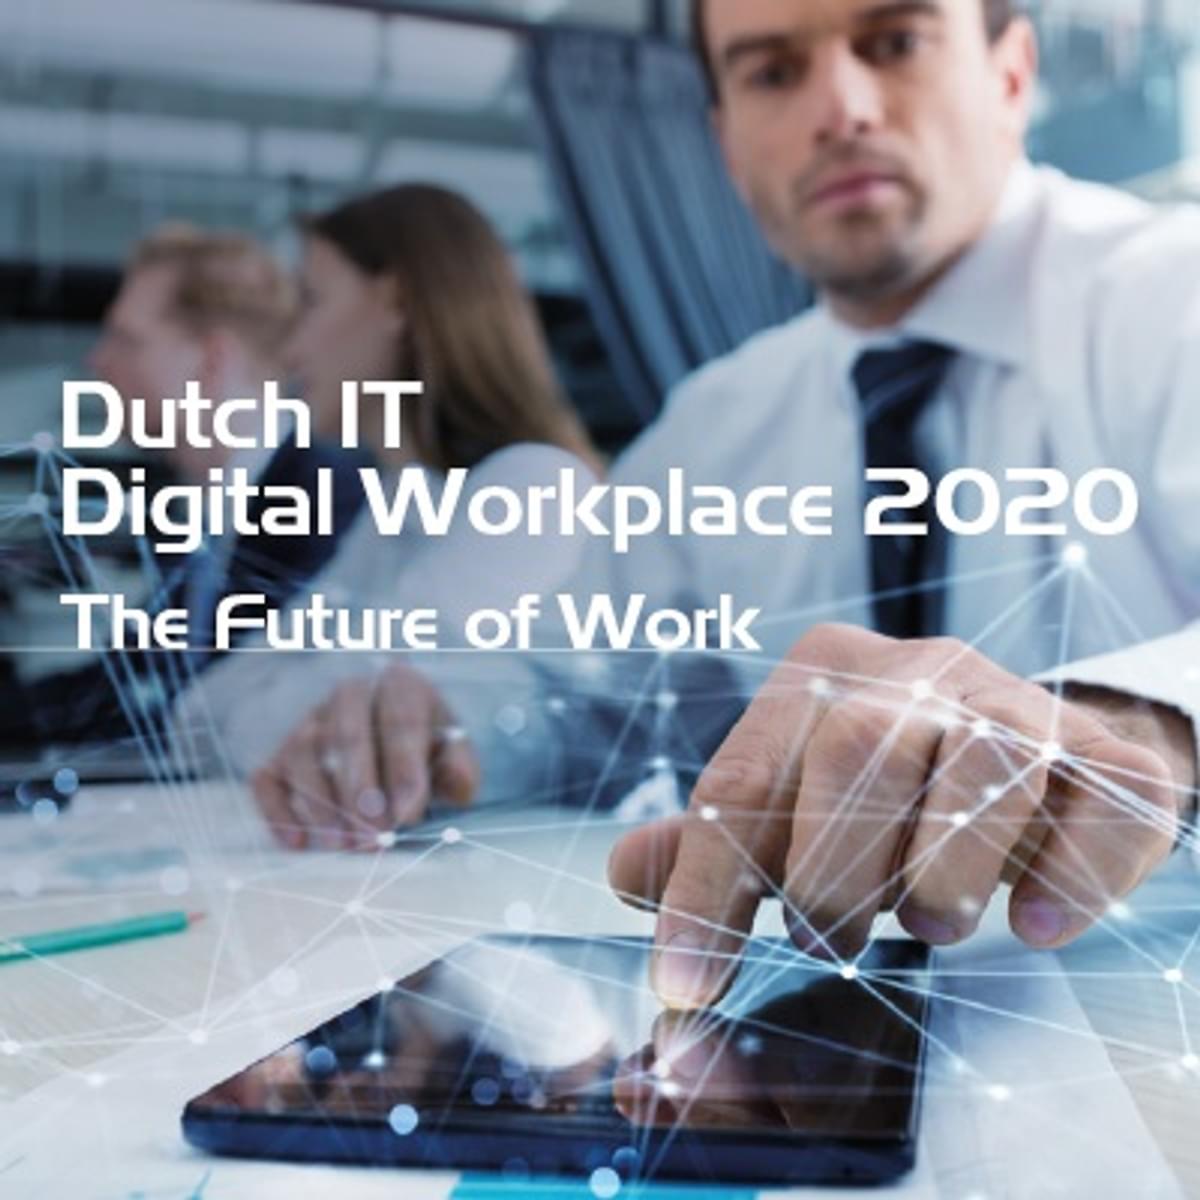 Dutch IT Digital Workplace Project 2020: The Future of Work image